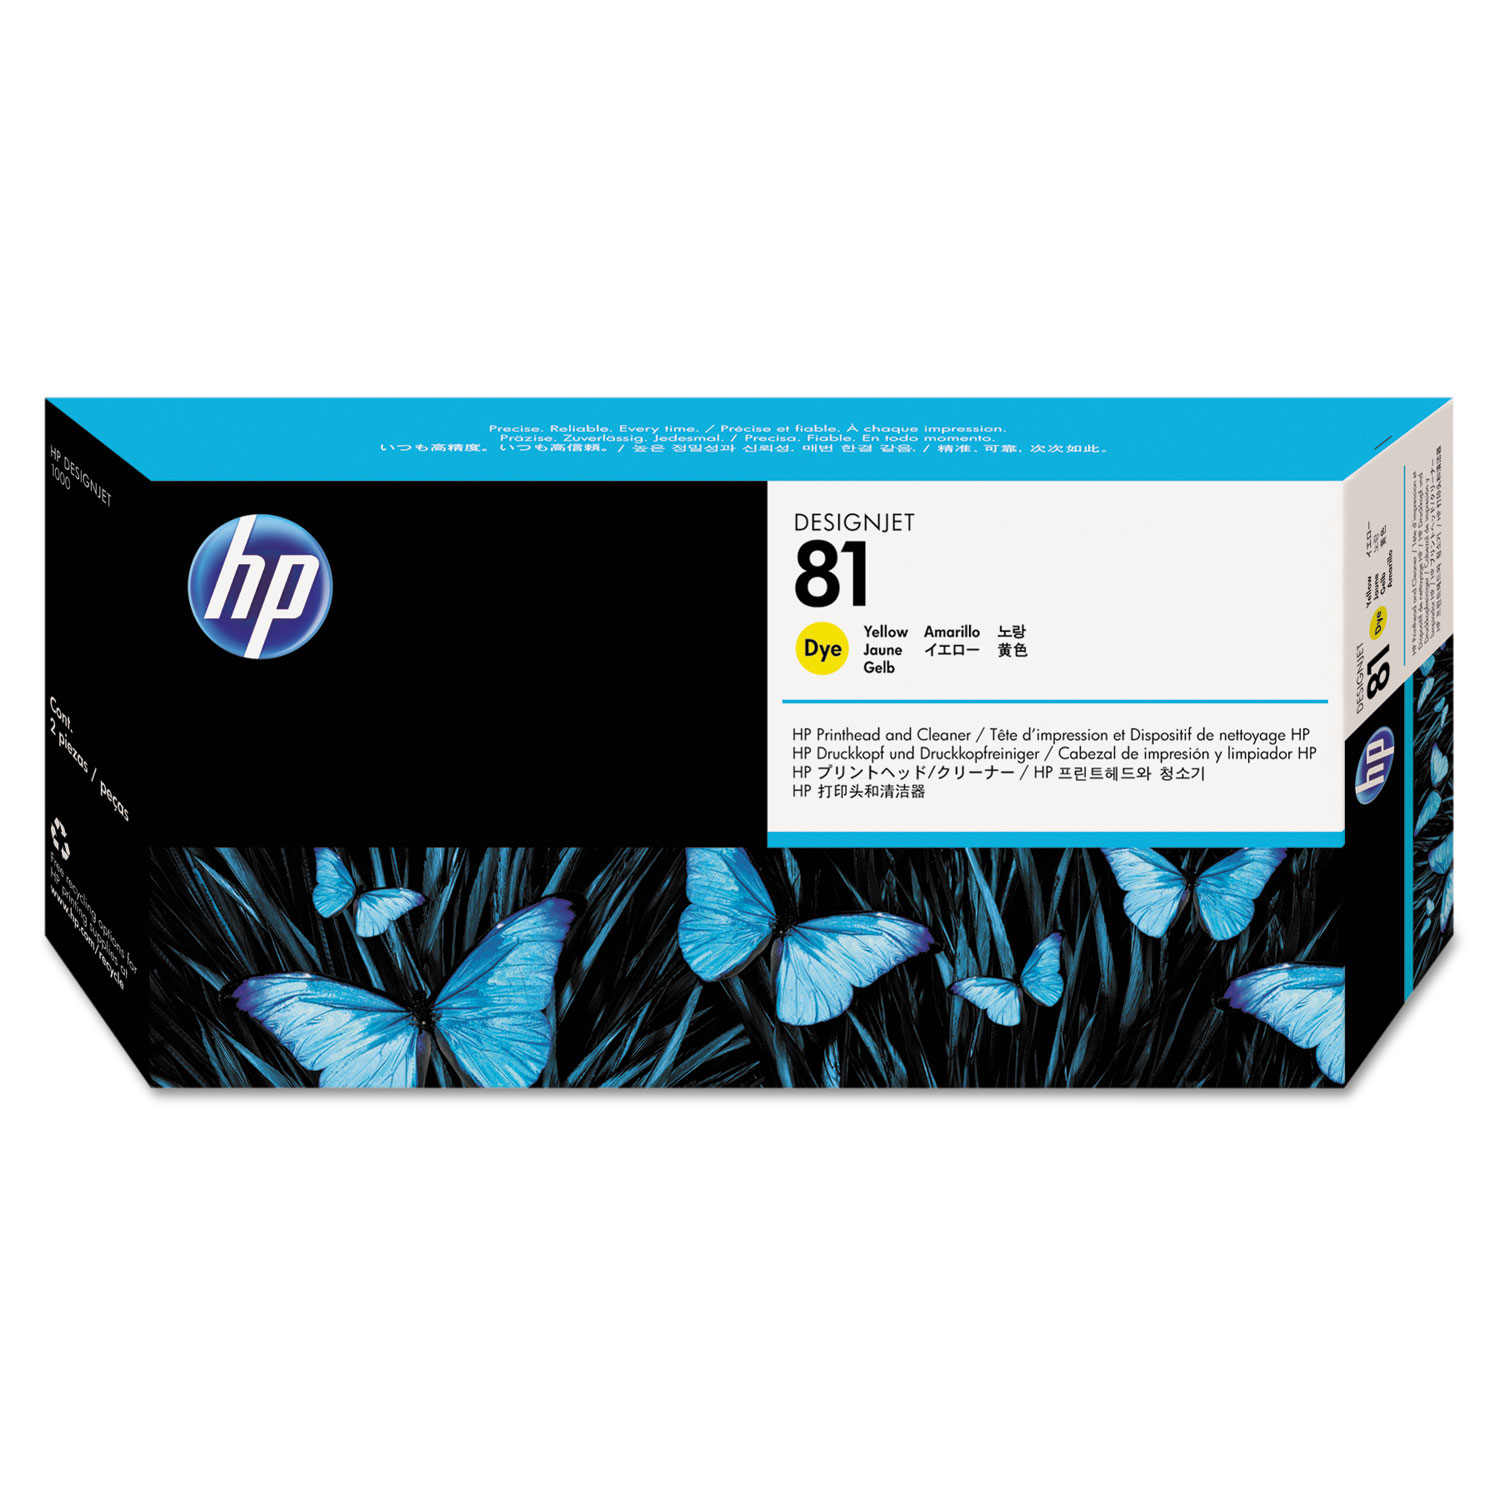  HP C4953A HP 81, (C4953A) Yellow Printhead and Cleaner (HEWC4953A) 